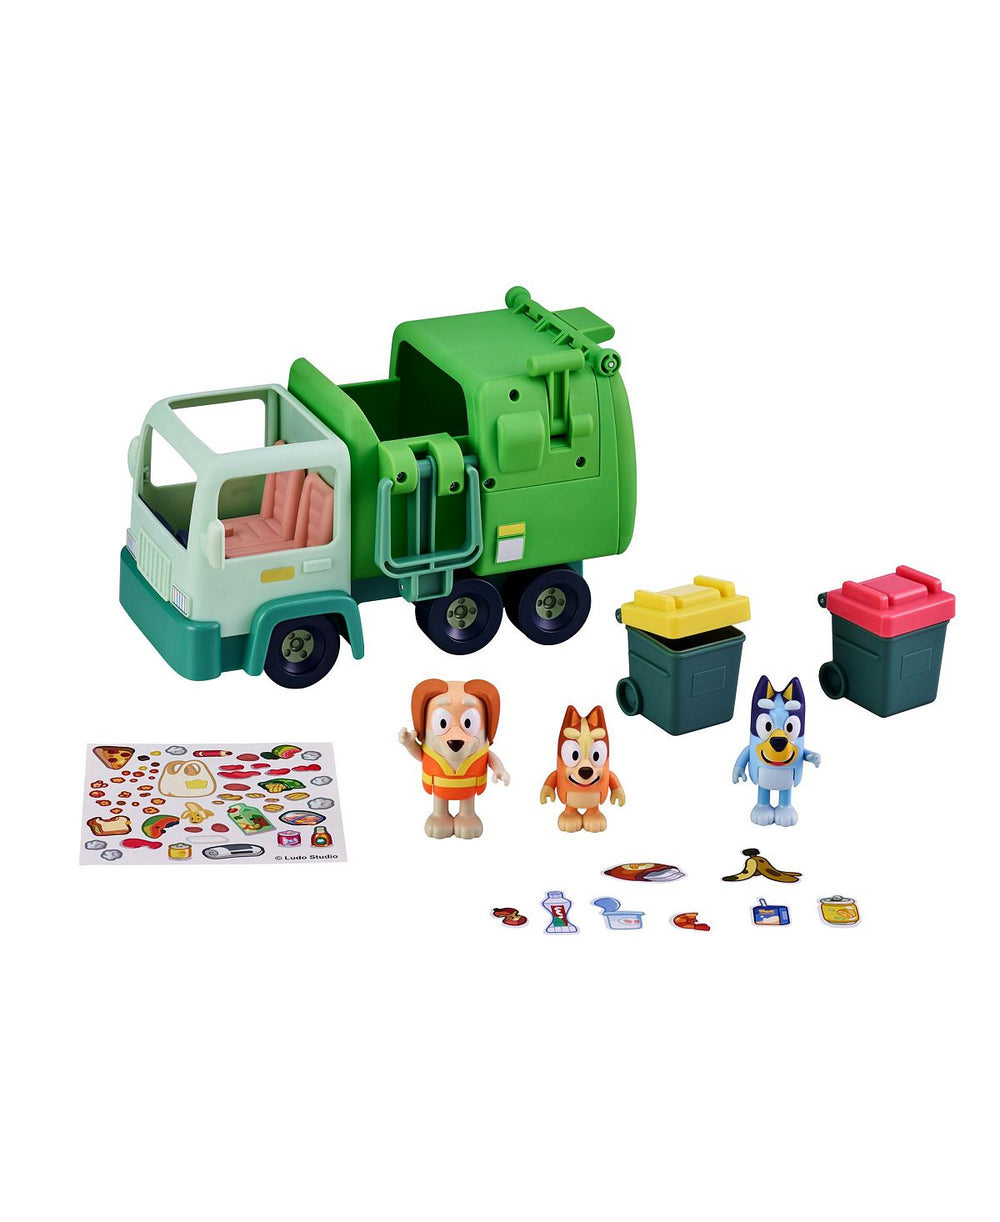 Bluey Series 6 Interactive Garbage Truck Playset with Figures